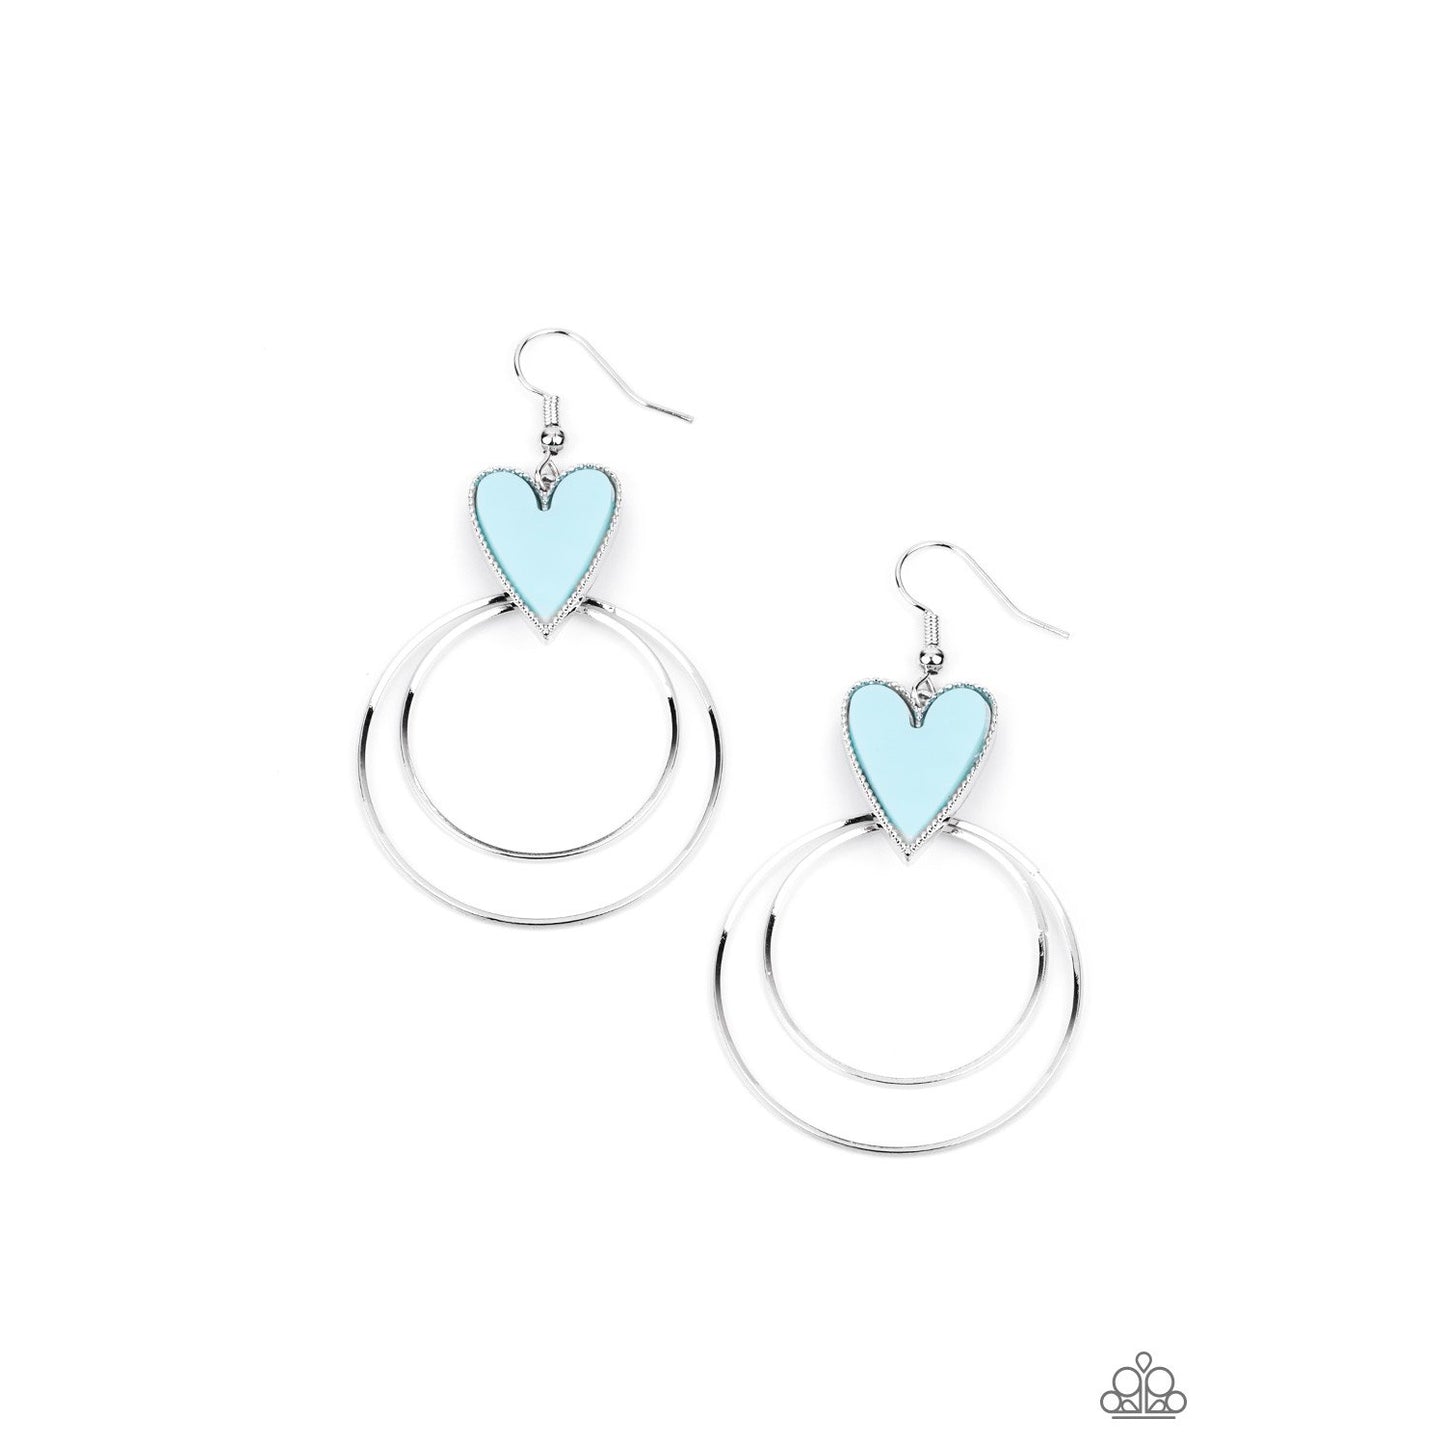 Happily Ever Hearts - Blue Heart Earrings - Paparazzi Accessories - GlaMarous Titi Jewels